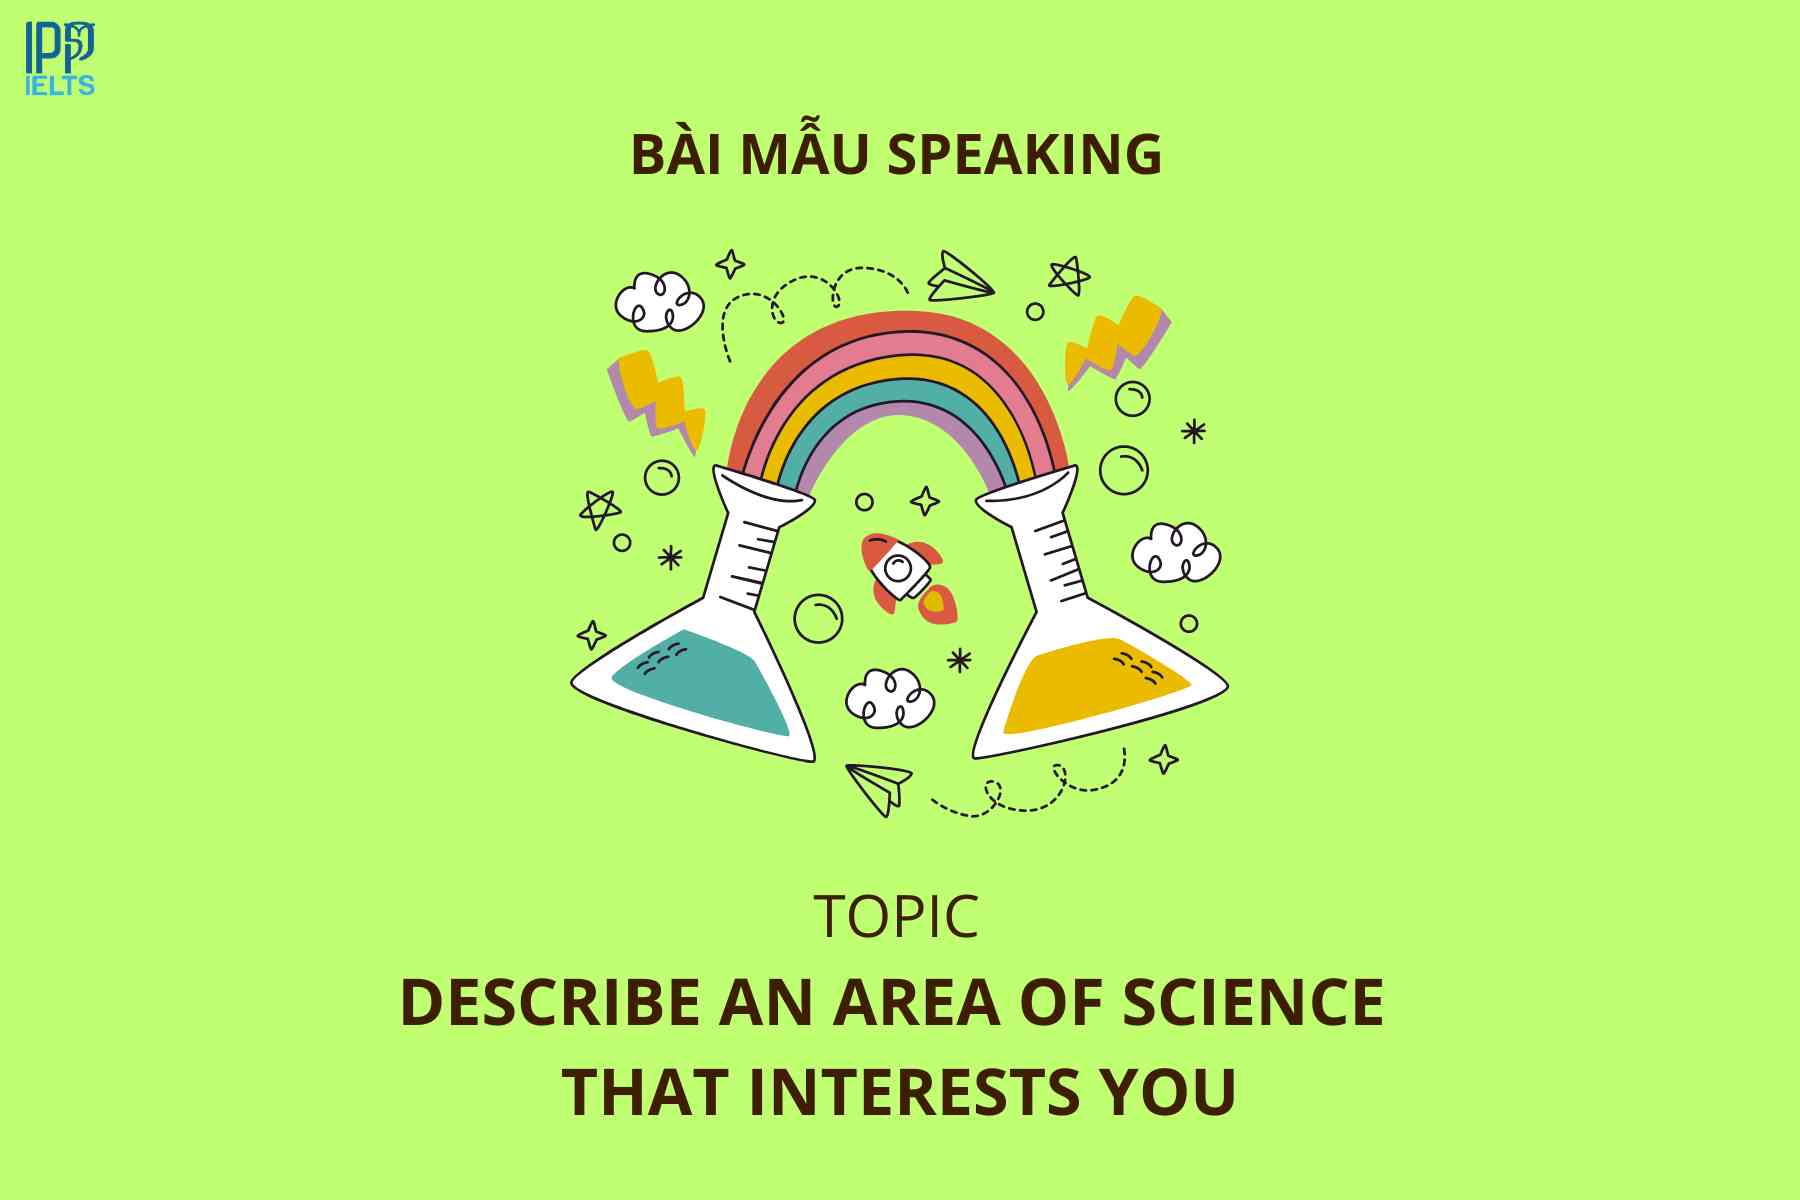 anh bia bai mau Describe an area of science that interests you